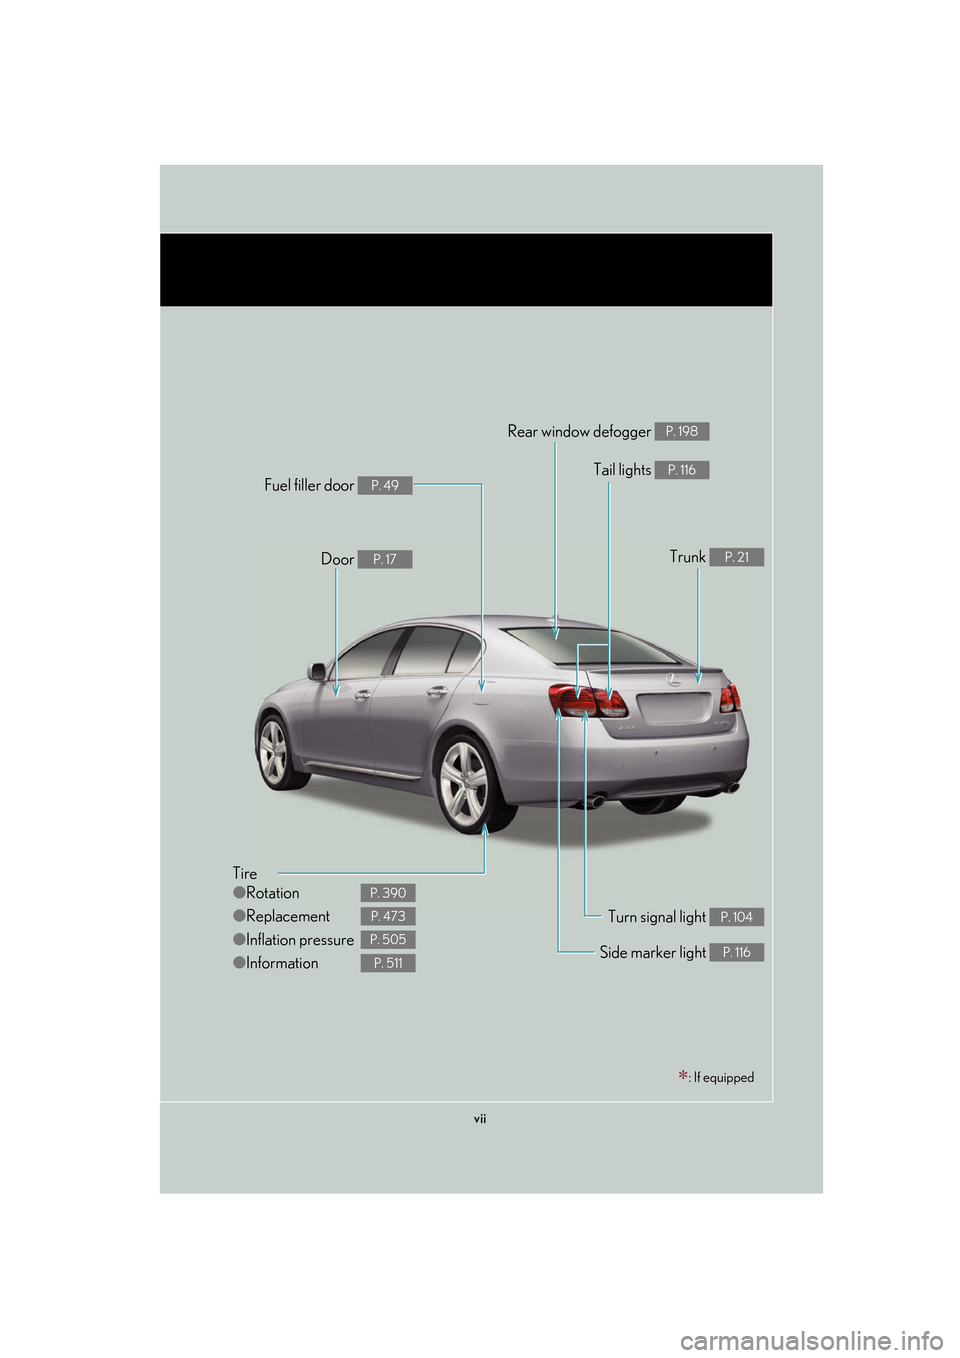 Lexus GS350 2007  Using the interior lights / LEXUS 2007 GS430/350 OWNERS MANUAL (OM30A04U) vii
Tire
●Rotation
● Replacement
● Inflation pressure
● Information
P. 390
P. 473
P. 505
P. 511
Tail lights P. 116
Side marker light P. 116
Trunk P. 21
Rear window defogger P. 198
Door P. 17
F